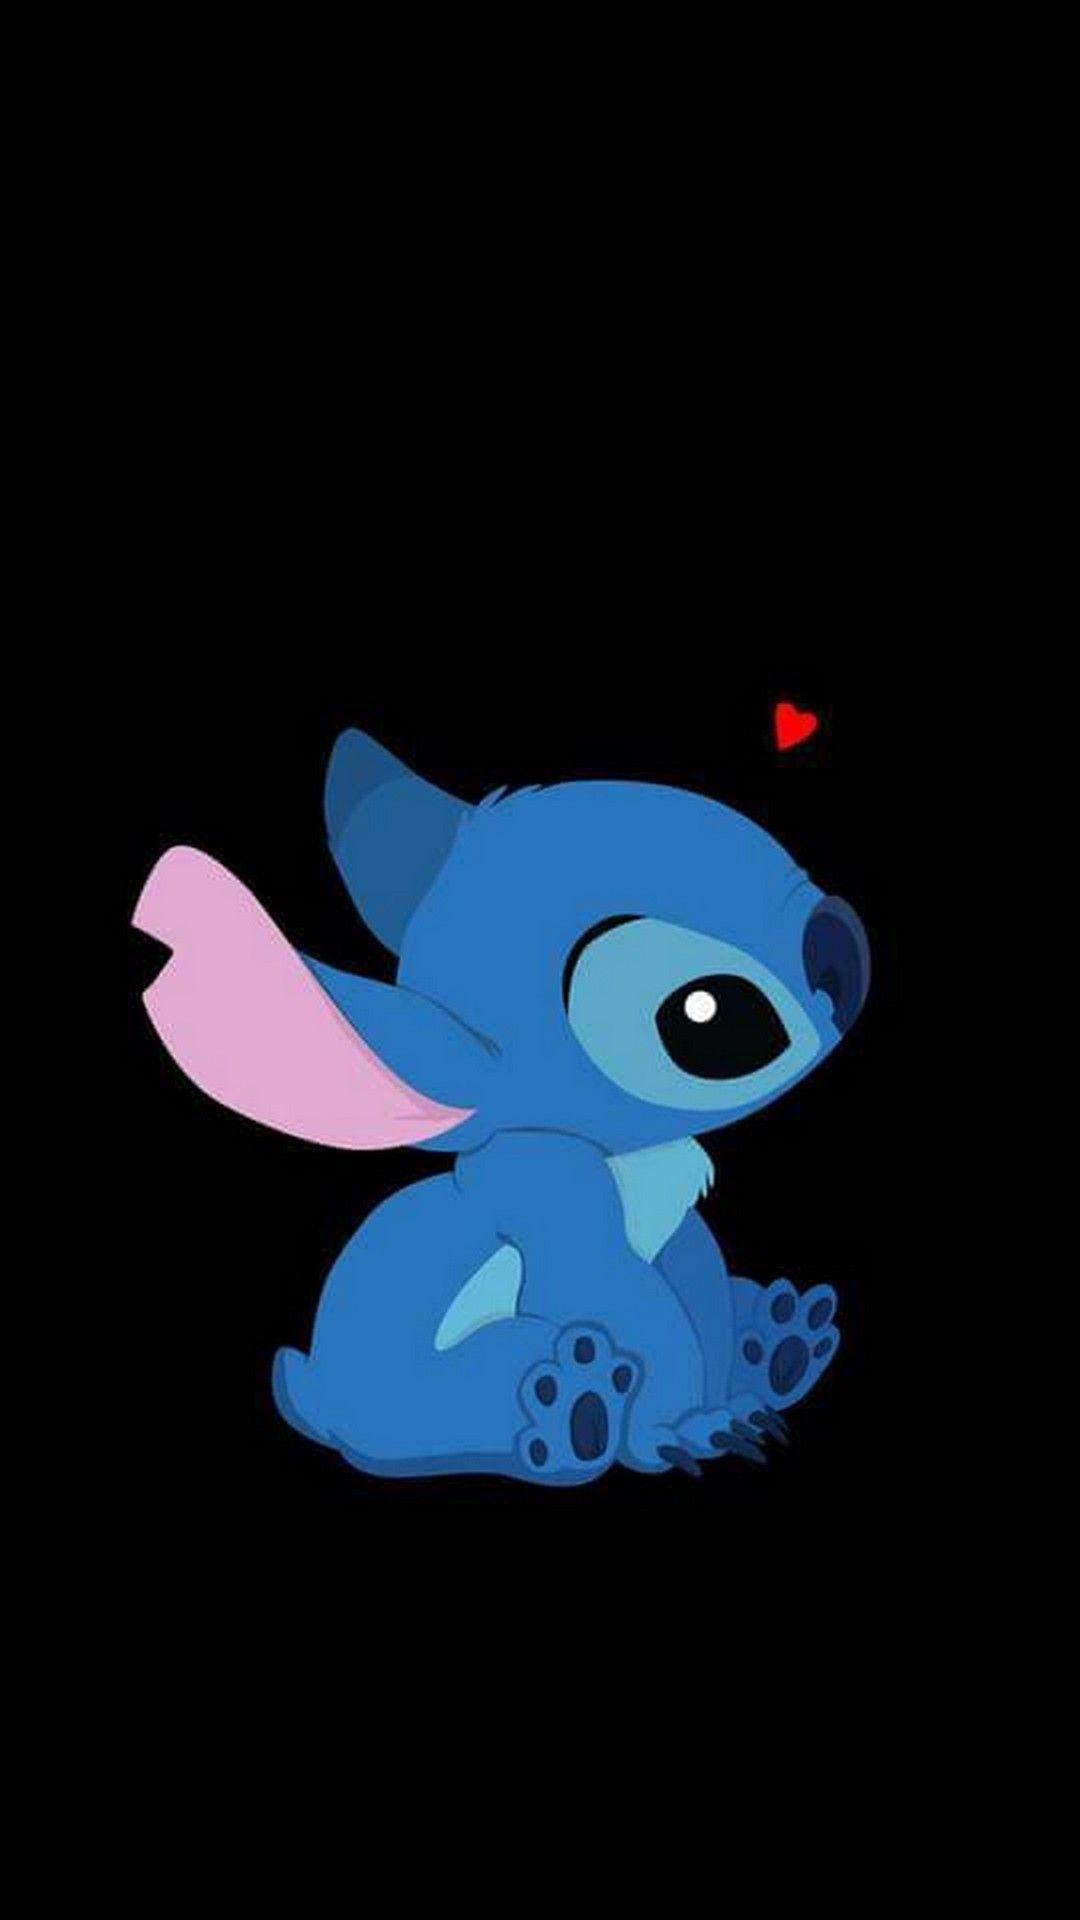 Cute Lilo and Stitch Wallpapers - Top